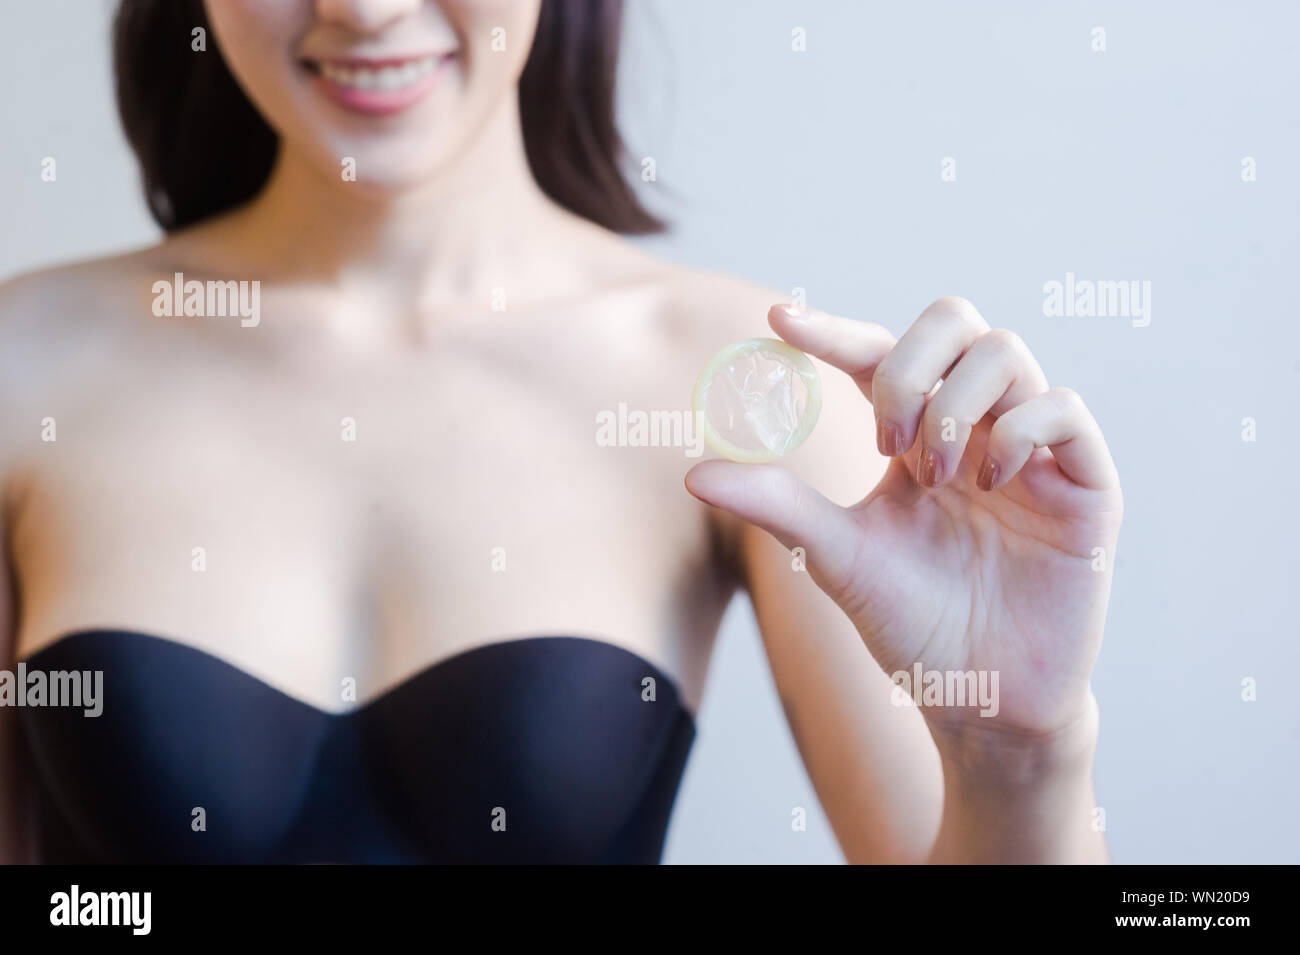 Midsection Of Smiling Young Woman Holding Condom Against White Background Stock Photo